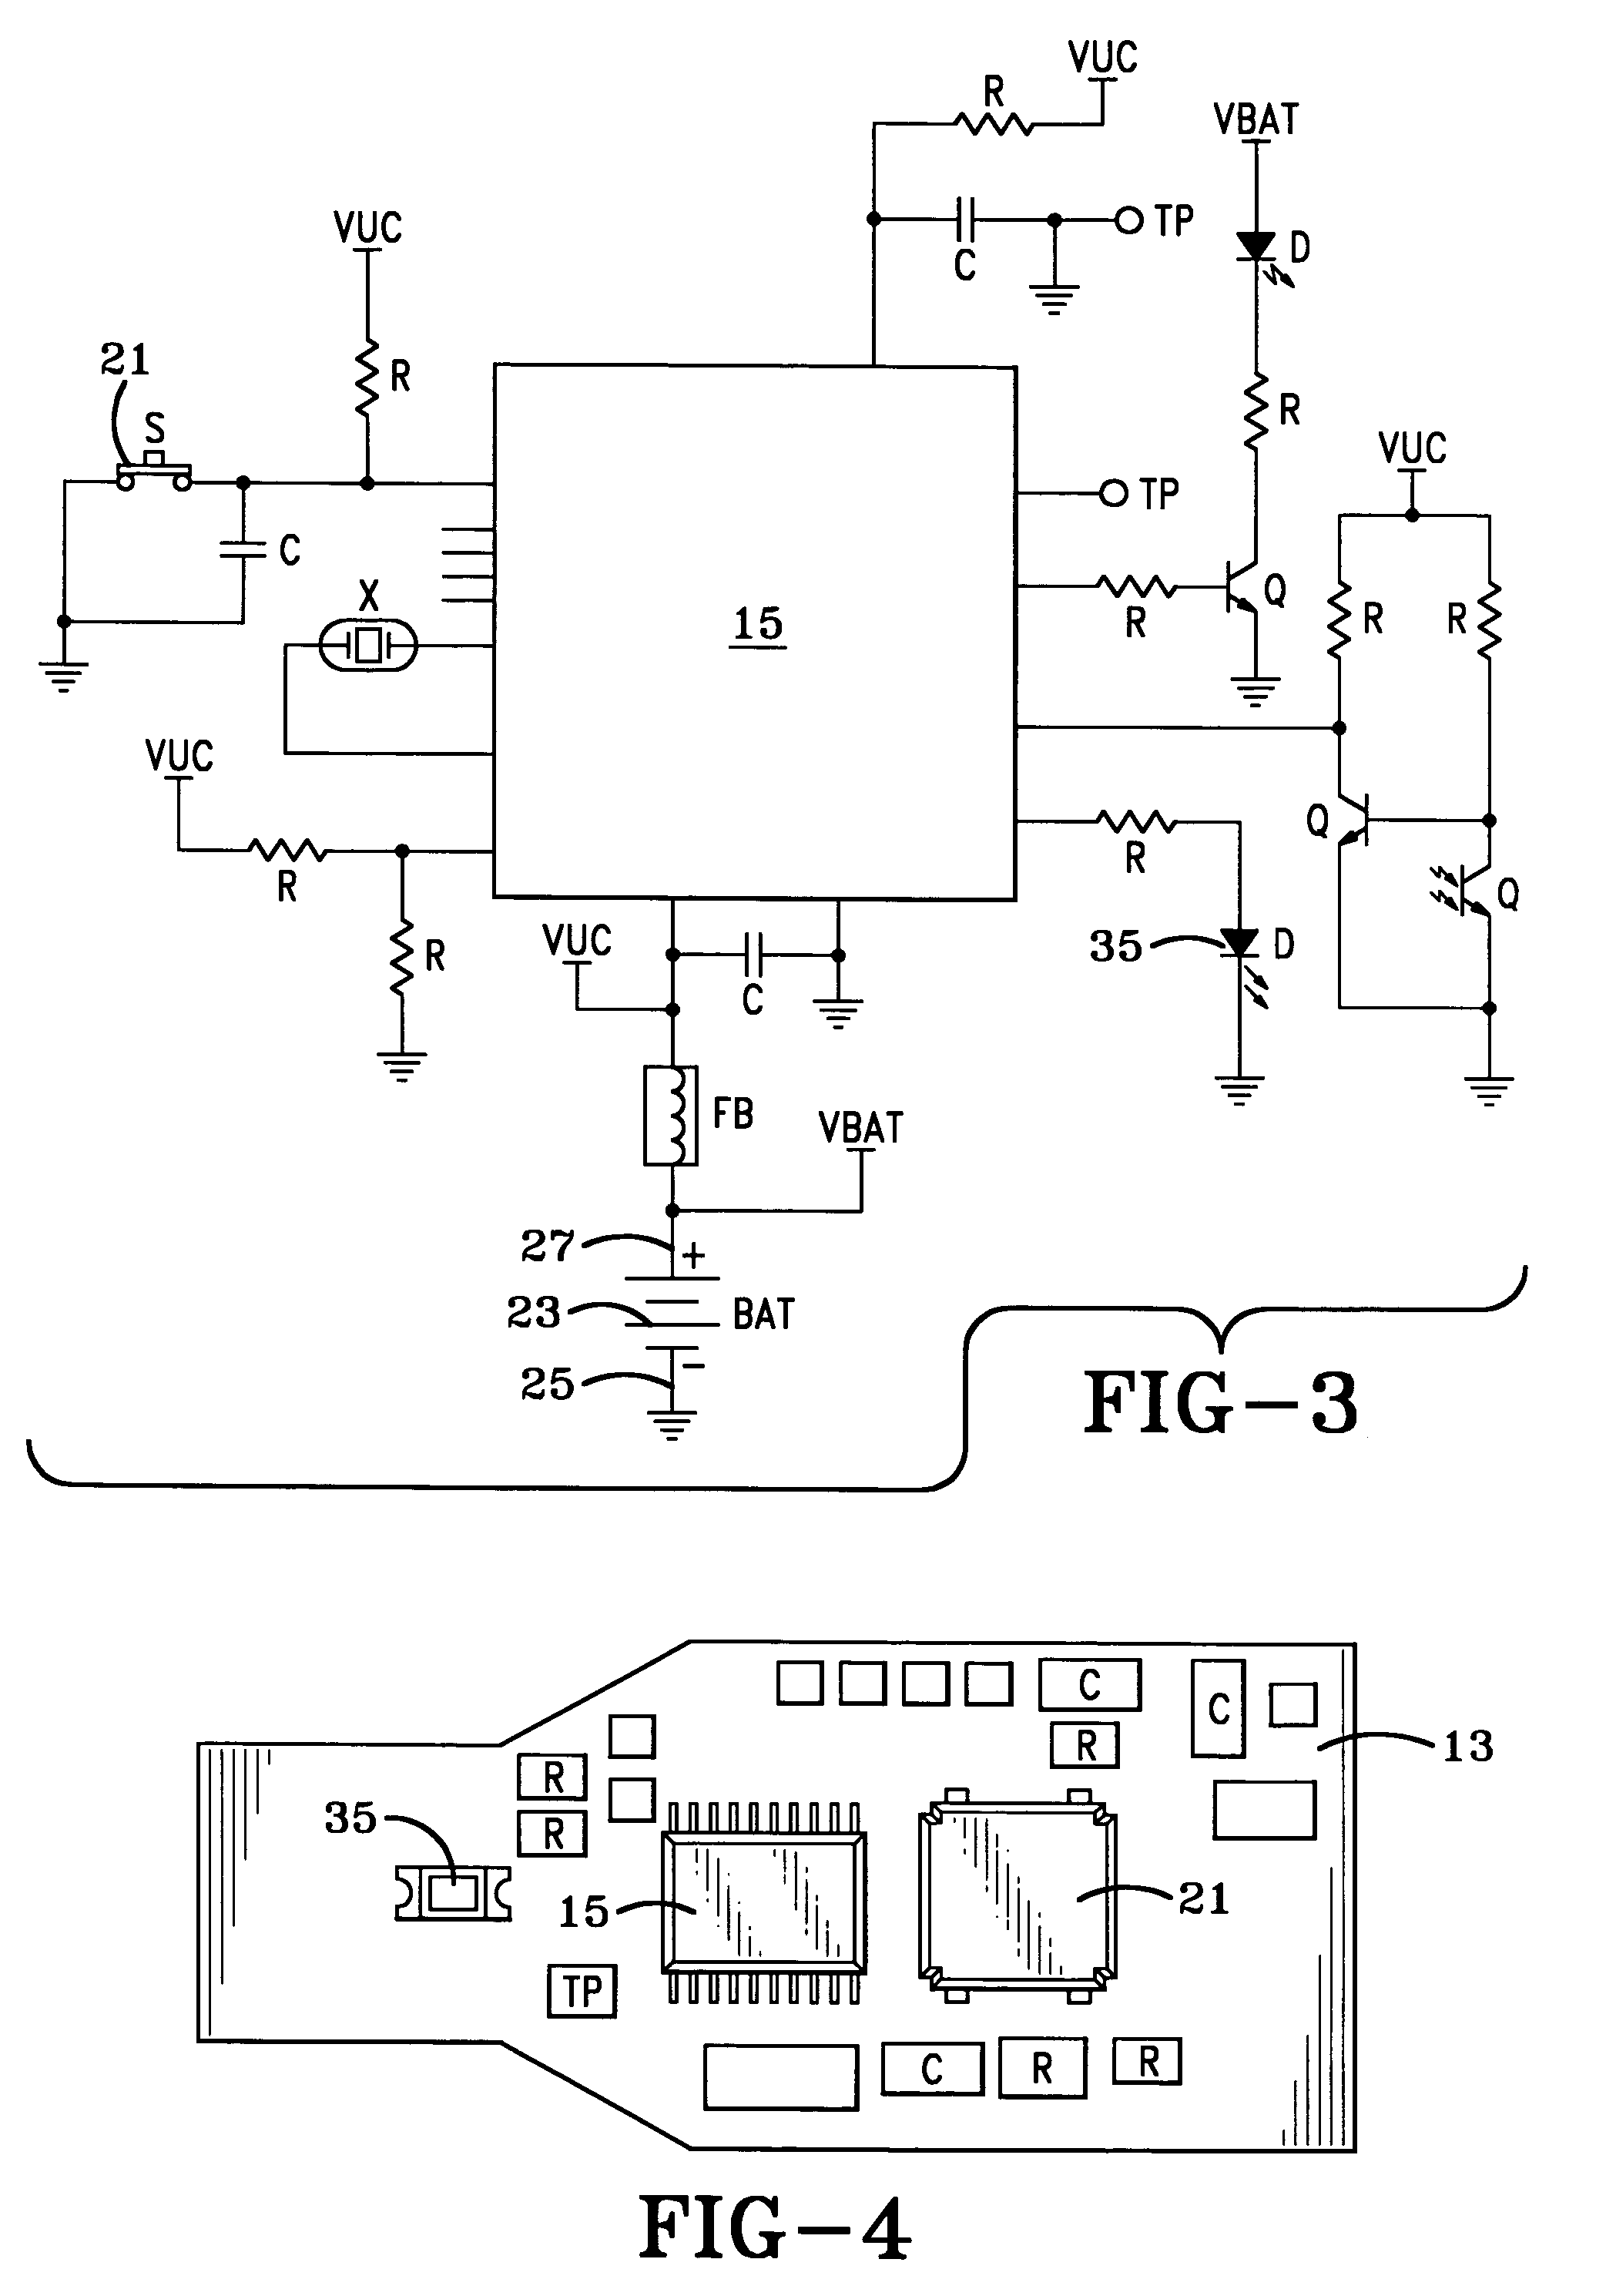 Programmable key for a security system for protecting merchandise